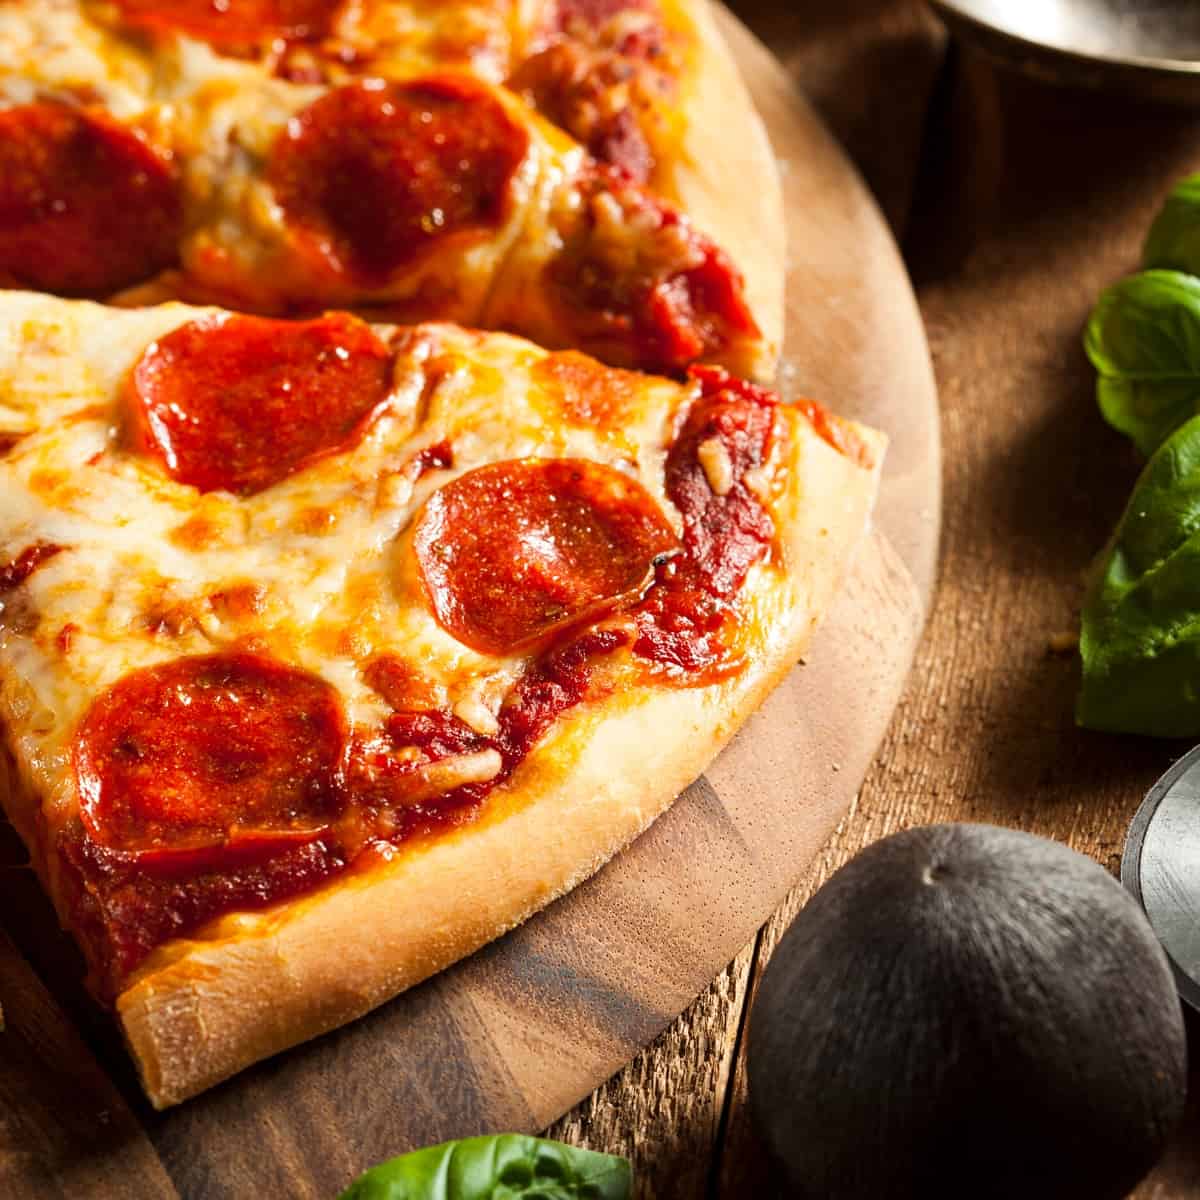 We are taking pizza night to a whole new level and cooking them on the Blackstone griddle. These Blackstone pizza recipes are perfect for when you are entertaining, having family over to enjoy the game, or just want a simple but flavorful pizza to make for dinner.